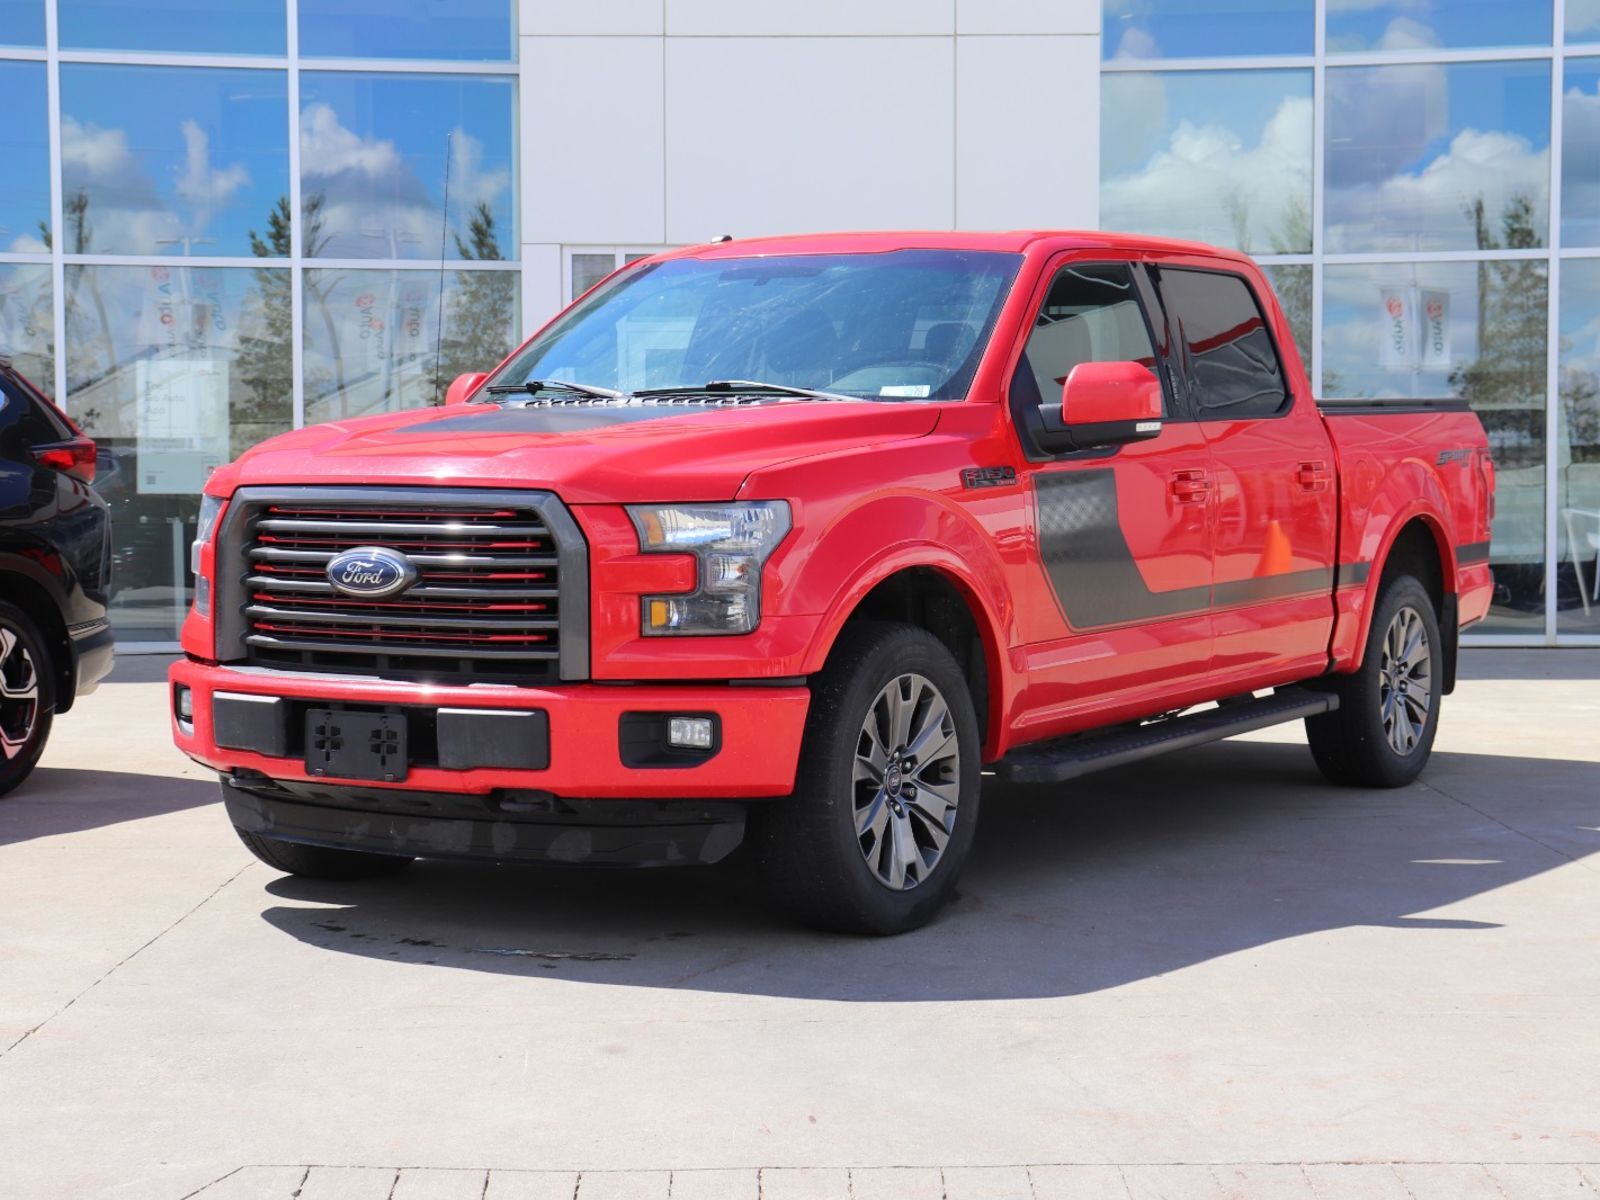 2016 Ford F-150 LARIAT 4WD MINT CONDITION!